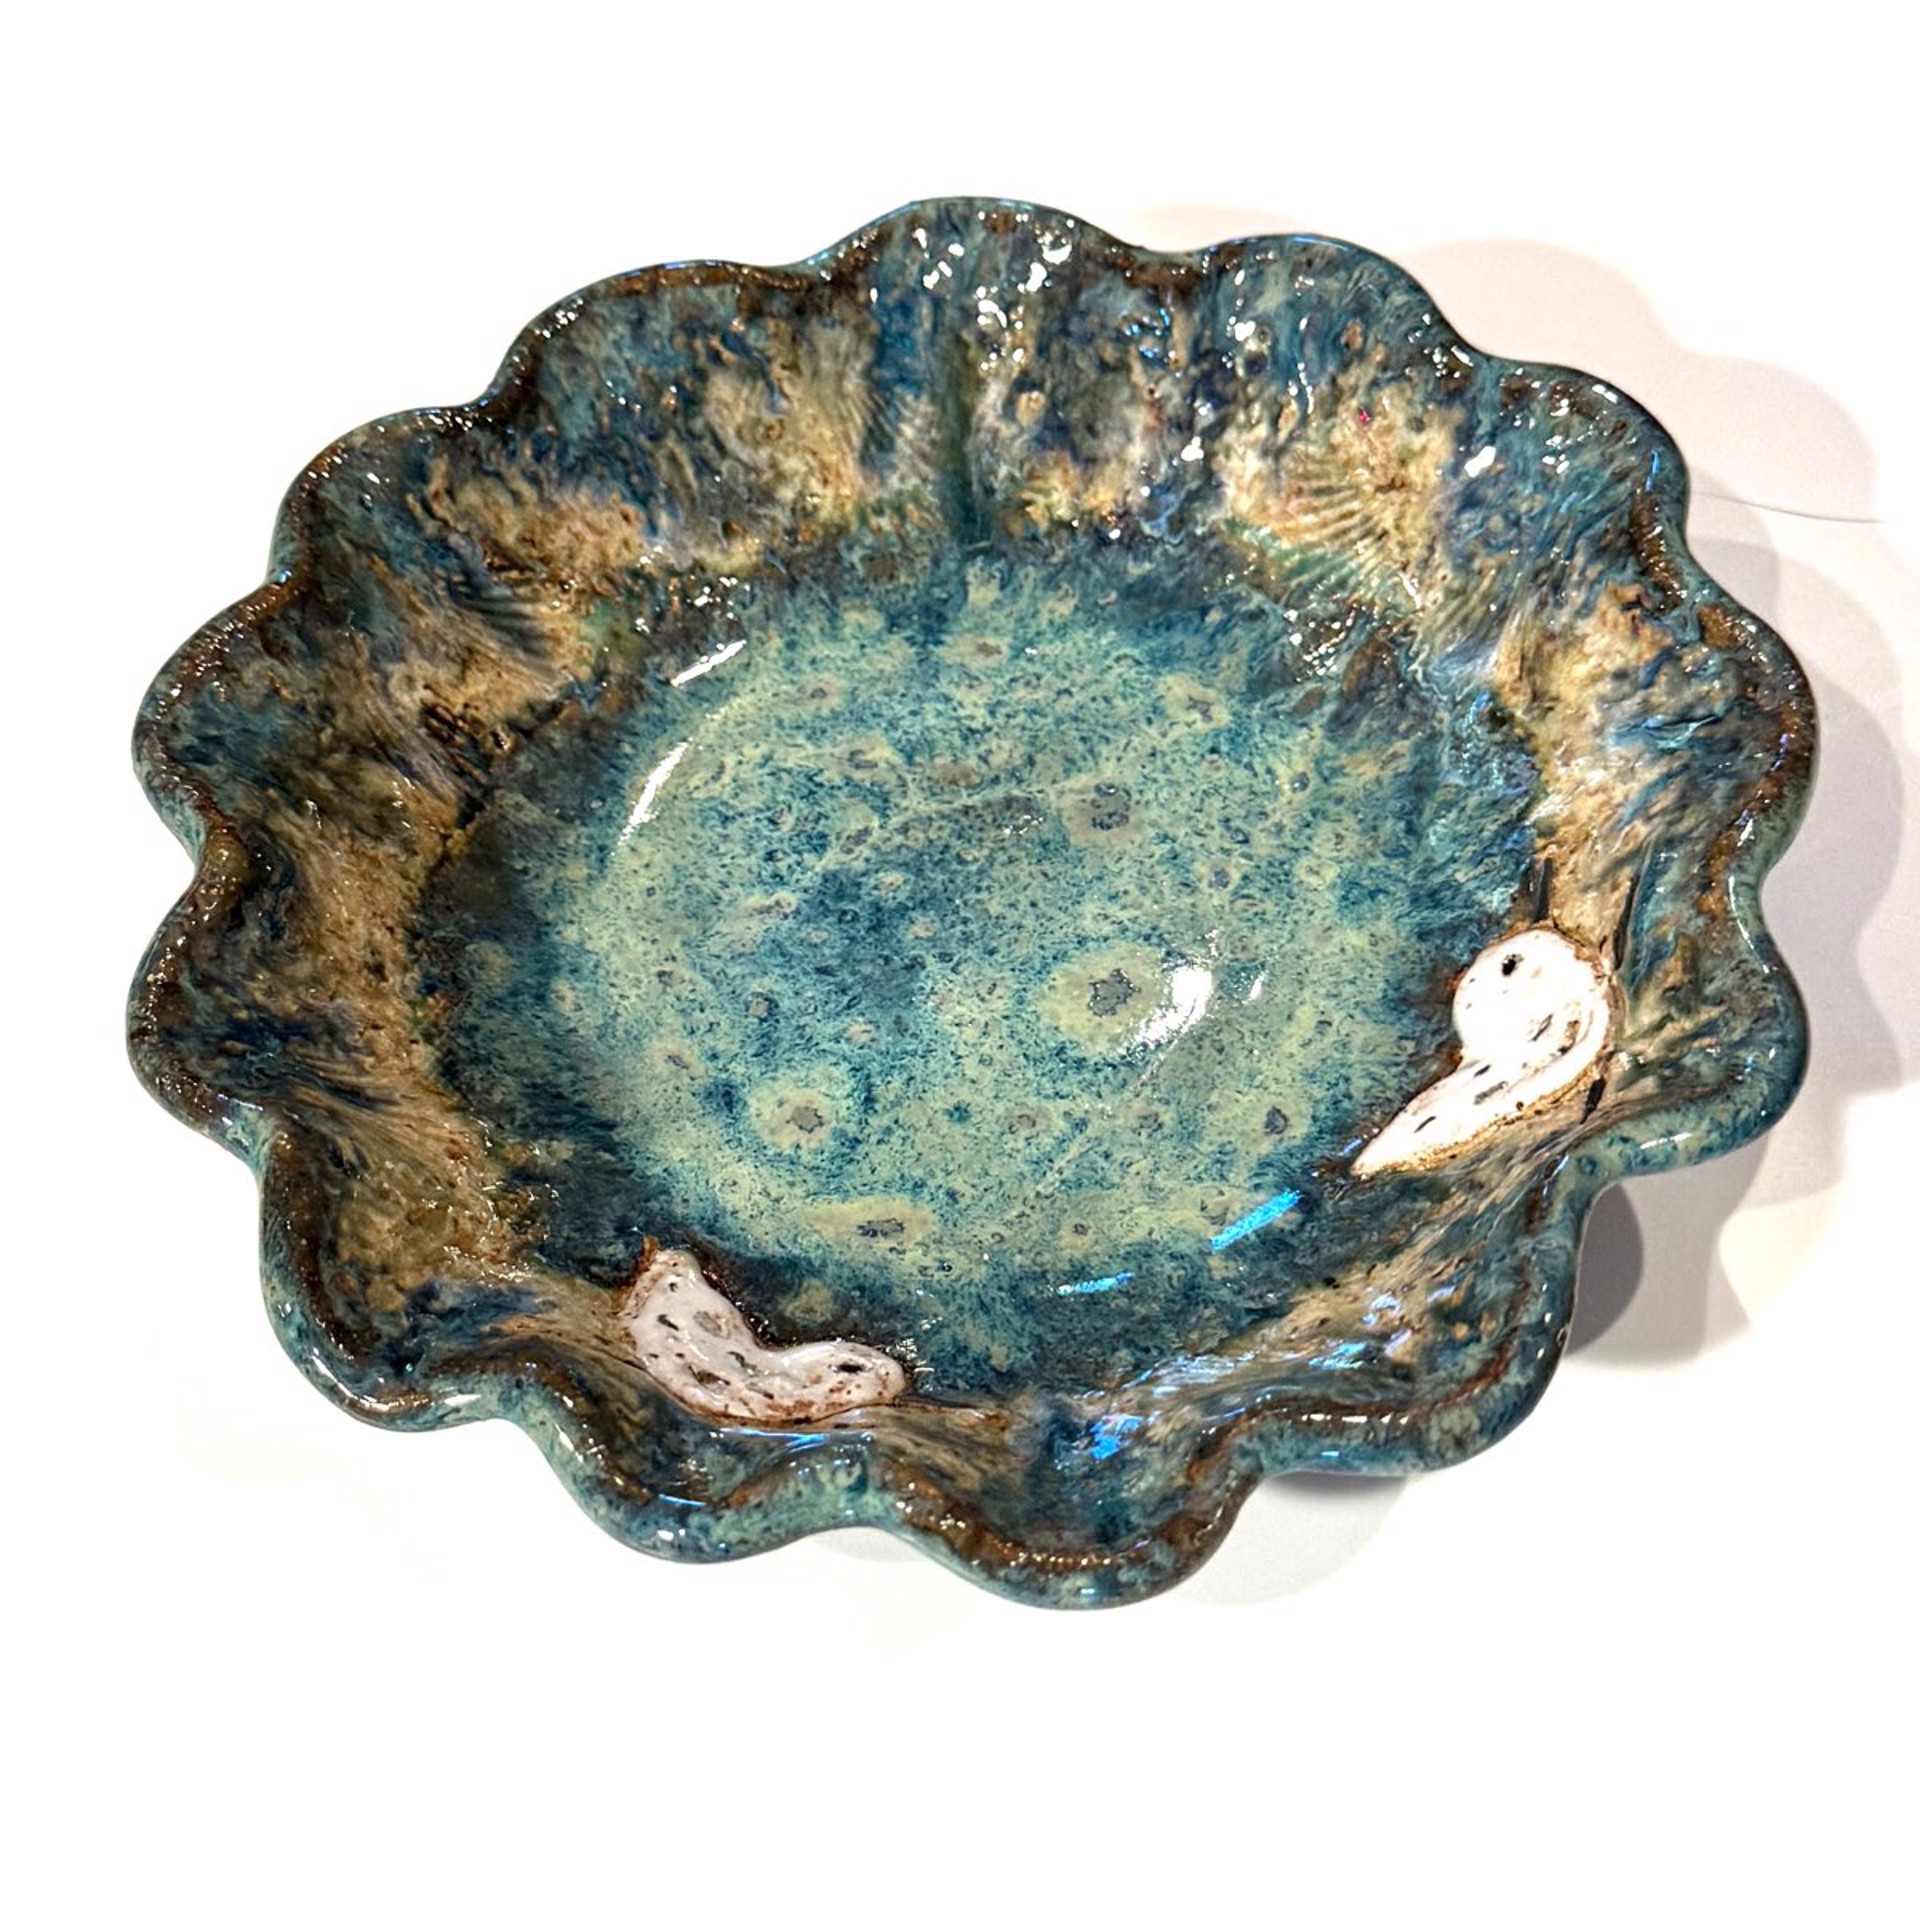 Round Scalloped Bowl with Two Sandpiper (Blue Glaze) LG23-1190 by Jim & Steffi Logan